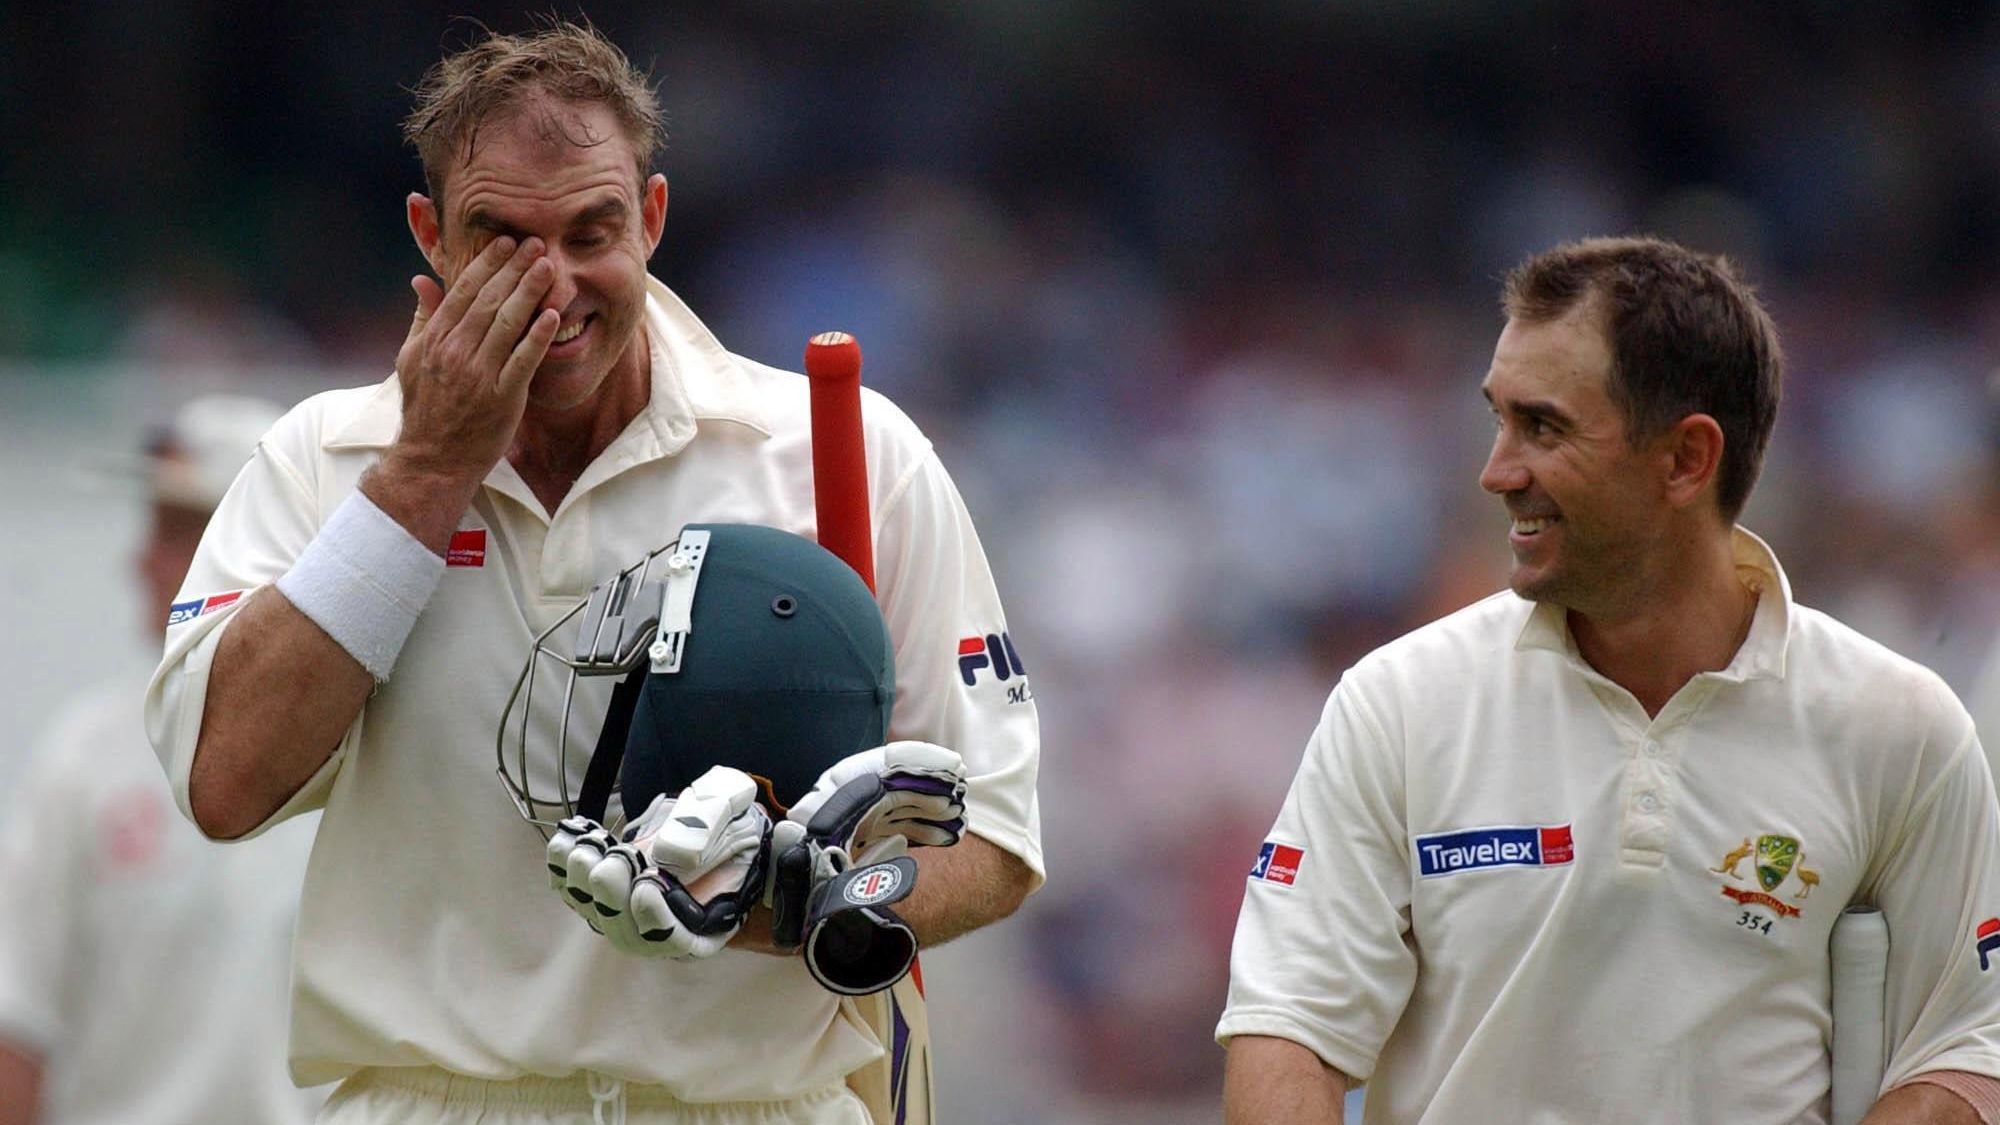 Australia&#x27;s Justin Langer (R) and Matthew Hayden share a joke during the second day of the fifth npower Test match against England at the Brit Oval, London, Friday September 9, 2005. PRESS ASSOCIATION Photo. Photo credit should read: Chris Young/PA.   (Photo by Chris Young - PA Images/PA Images via Getty Images)